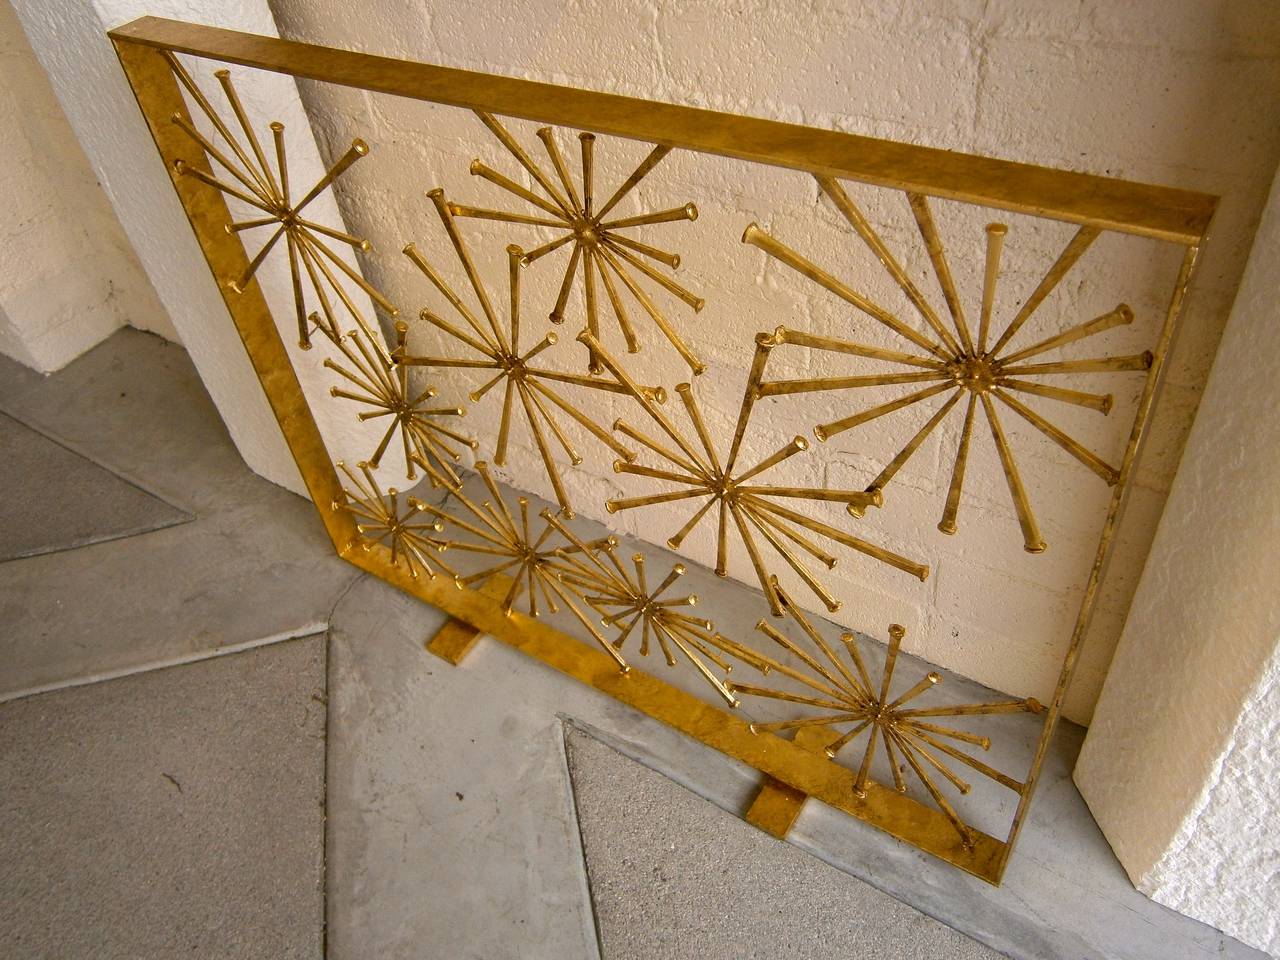 Contemporary Gilded Steel Studio-Made Starburst Fire Screen By American Artist Del Williams.